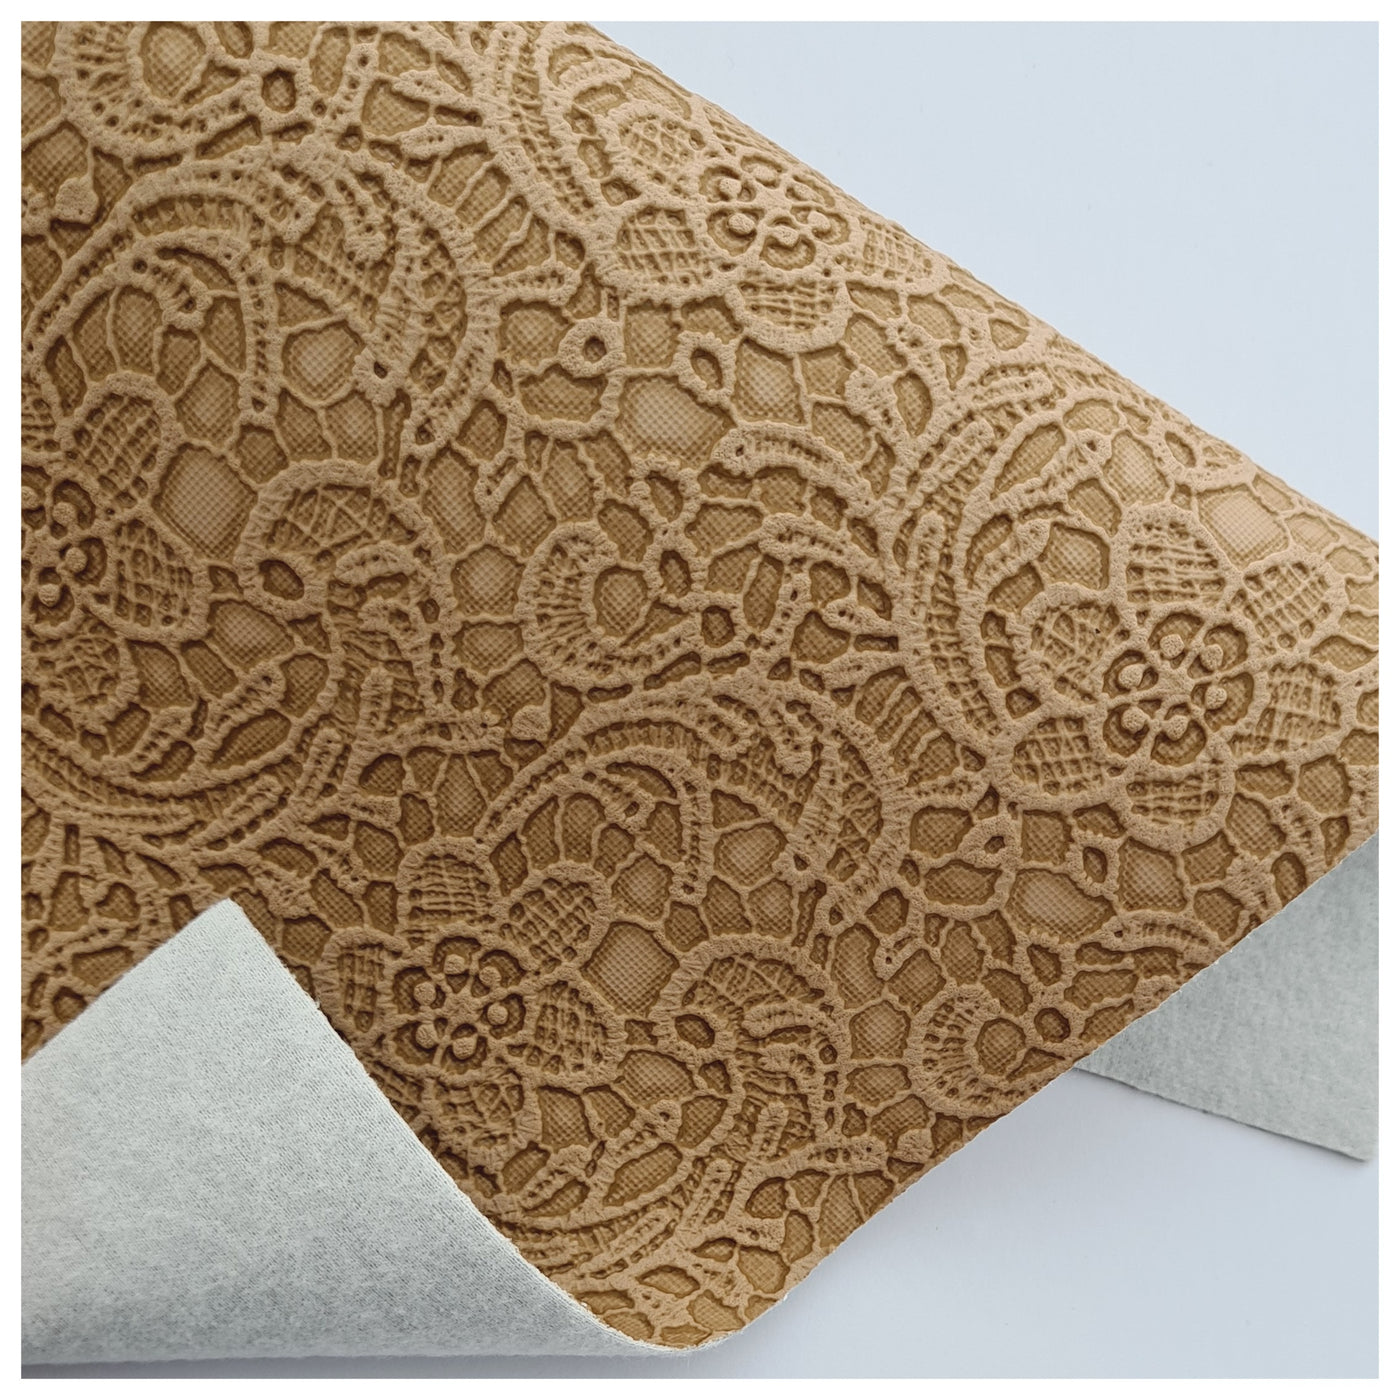 A4 Sheet of Ochre Embossed Lace Applique Faux Leather